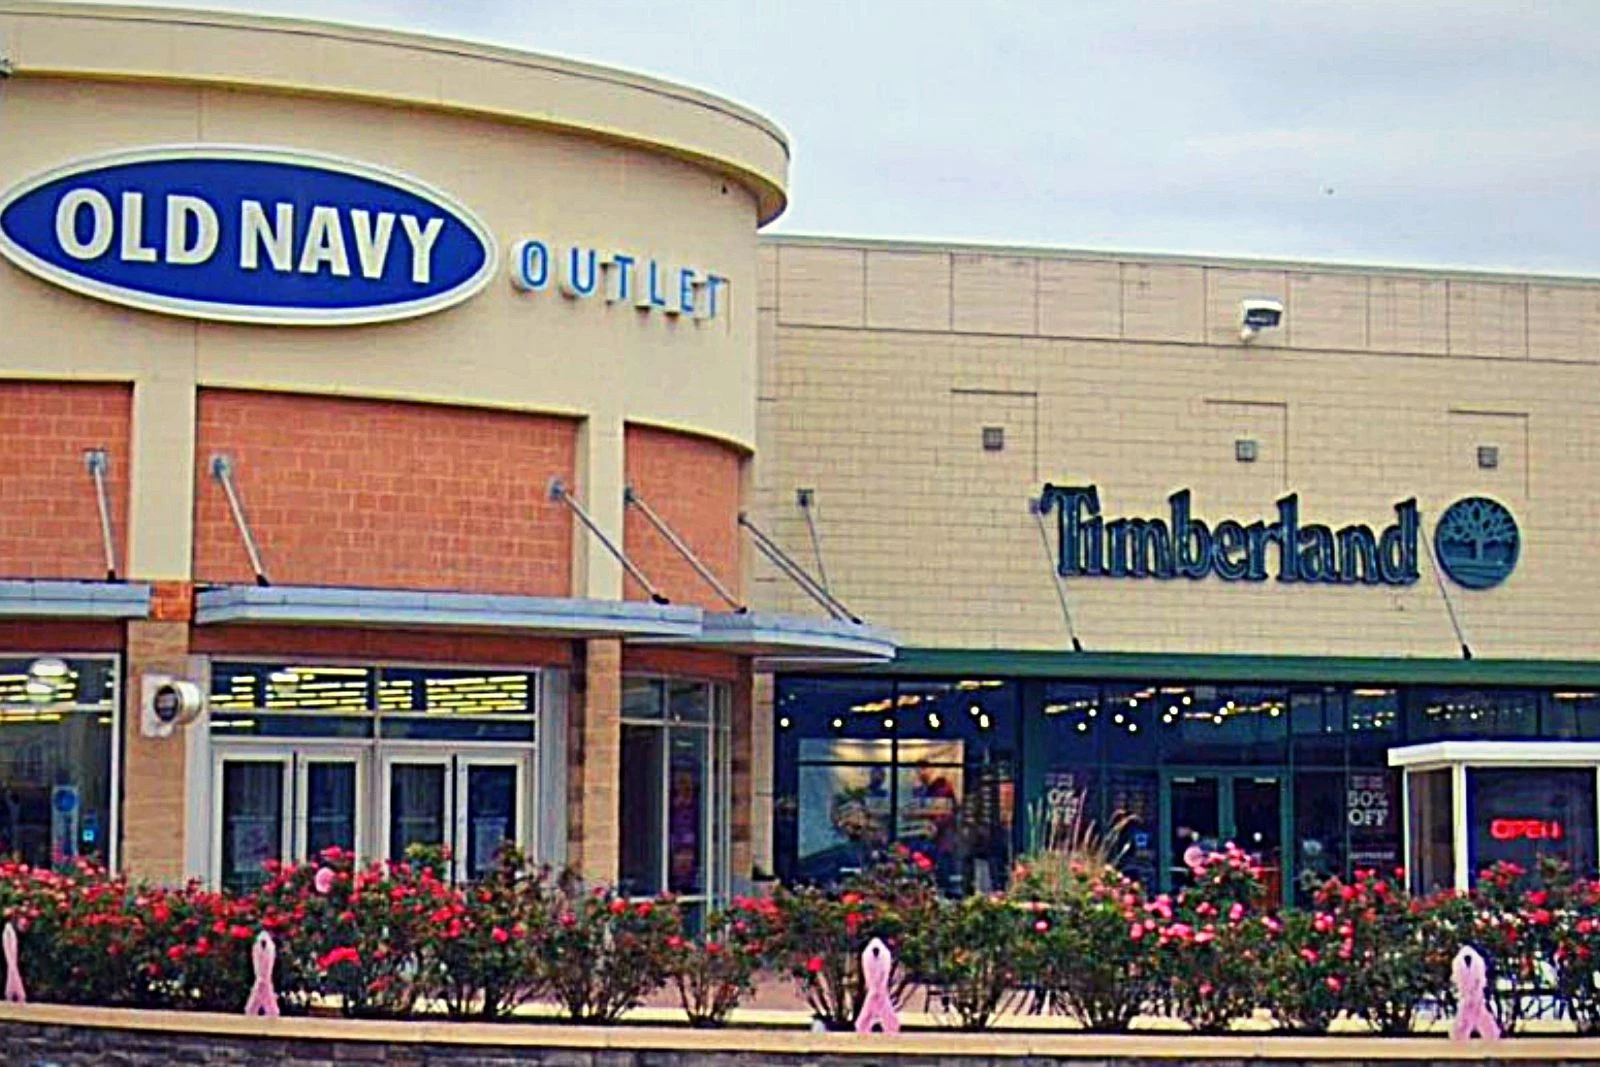 timberland outlet atlantic city new jersey